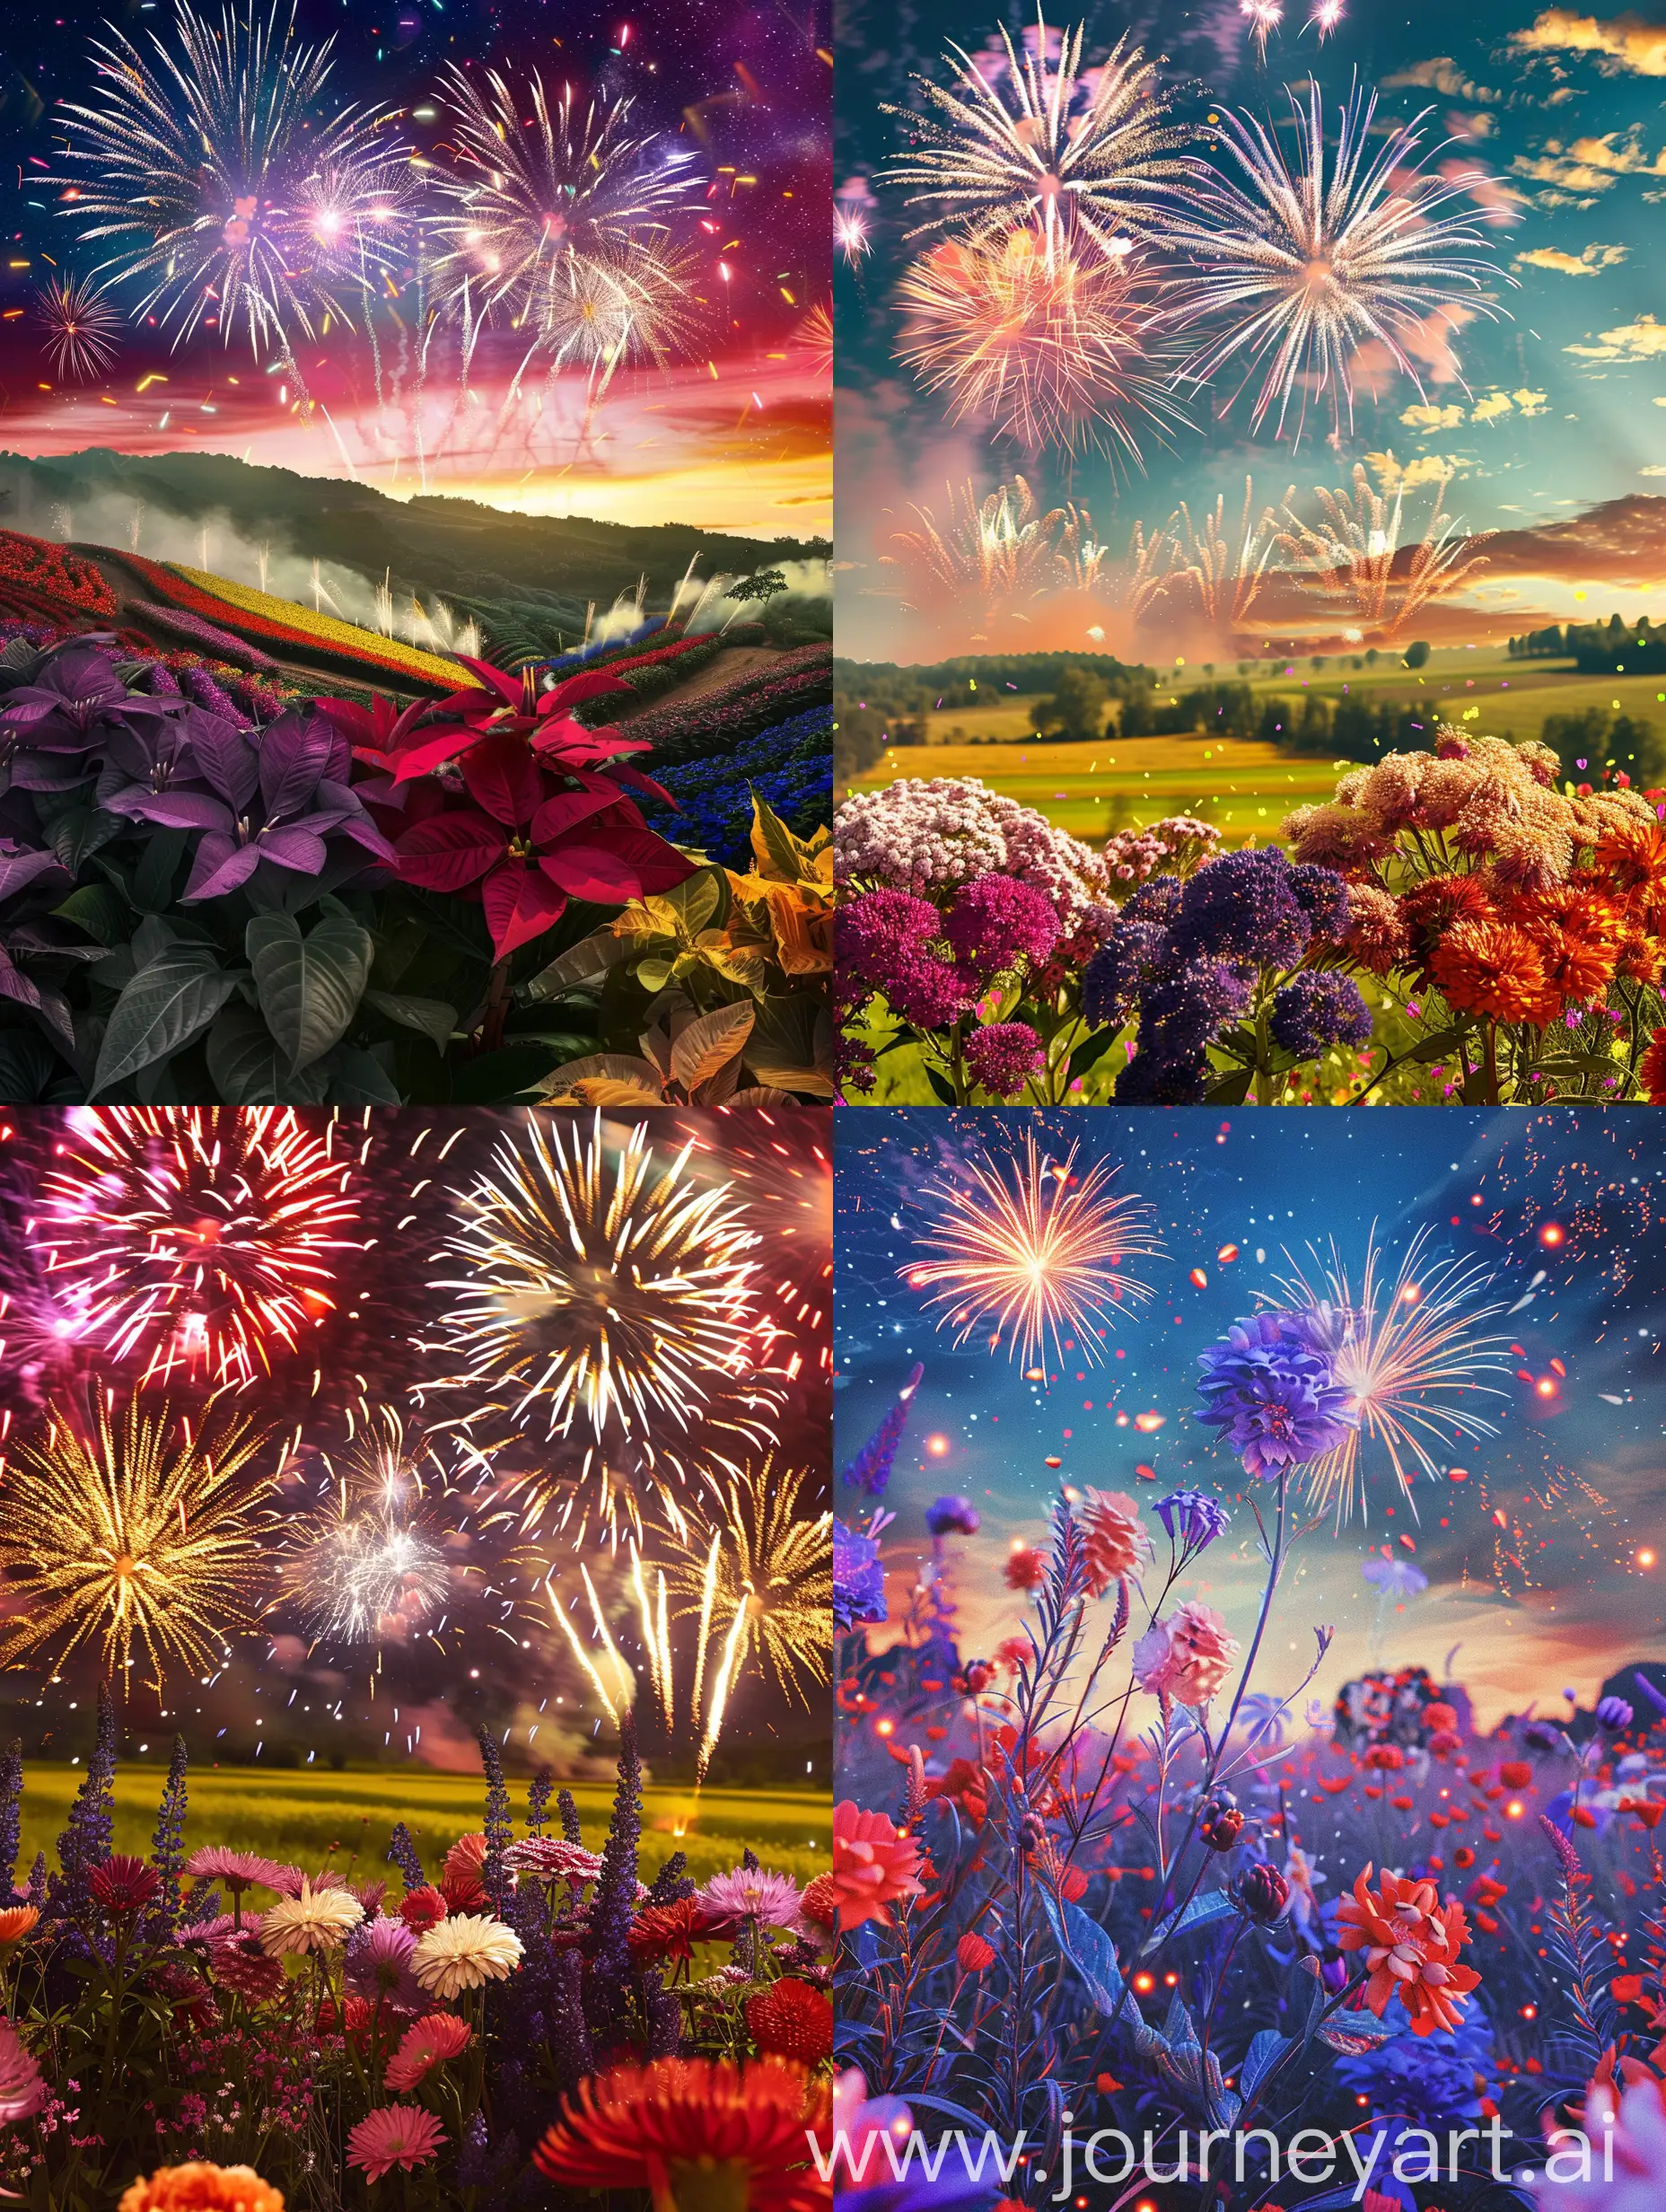 Vibrant-Holiday-Celebration-with-Fireworks-and-Colorful-Flowers